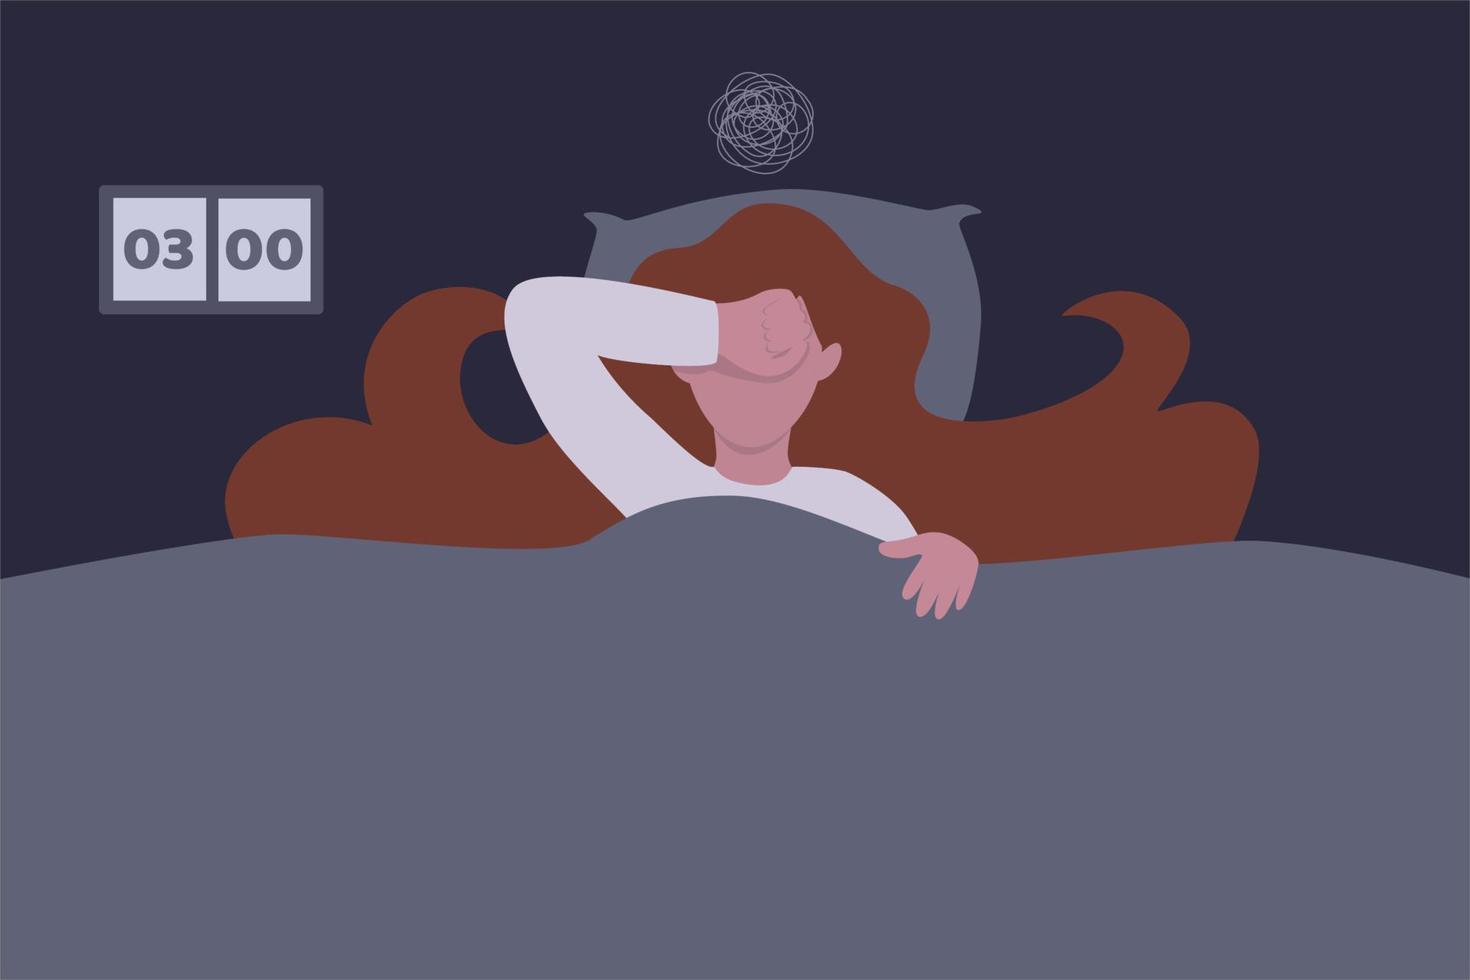 Insomnia make you feel exhausted, restless and sleepy all day, trouble sleeping come from stress, worried, health problem, insomnia woman wake up at night causing depression, frustration and sadness. vector